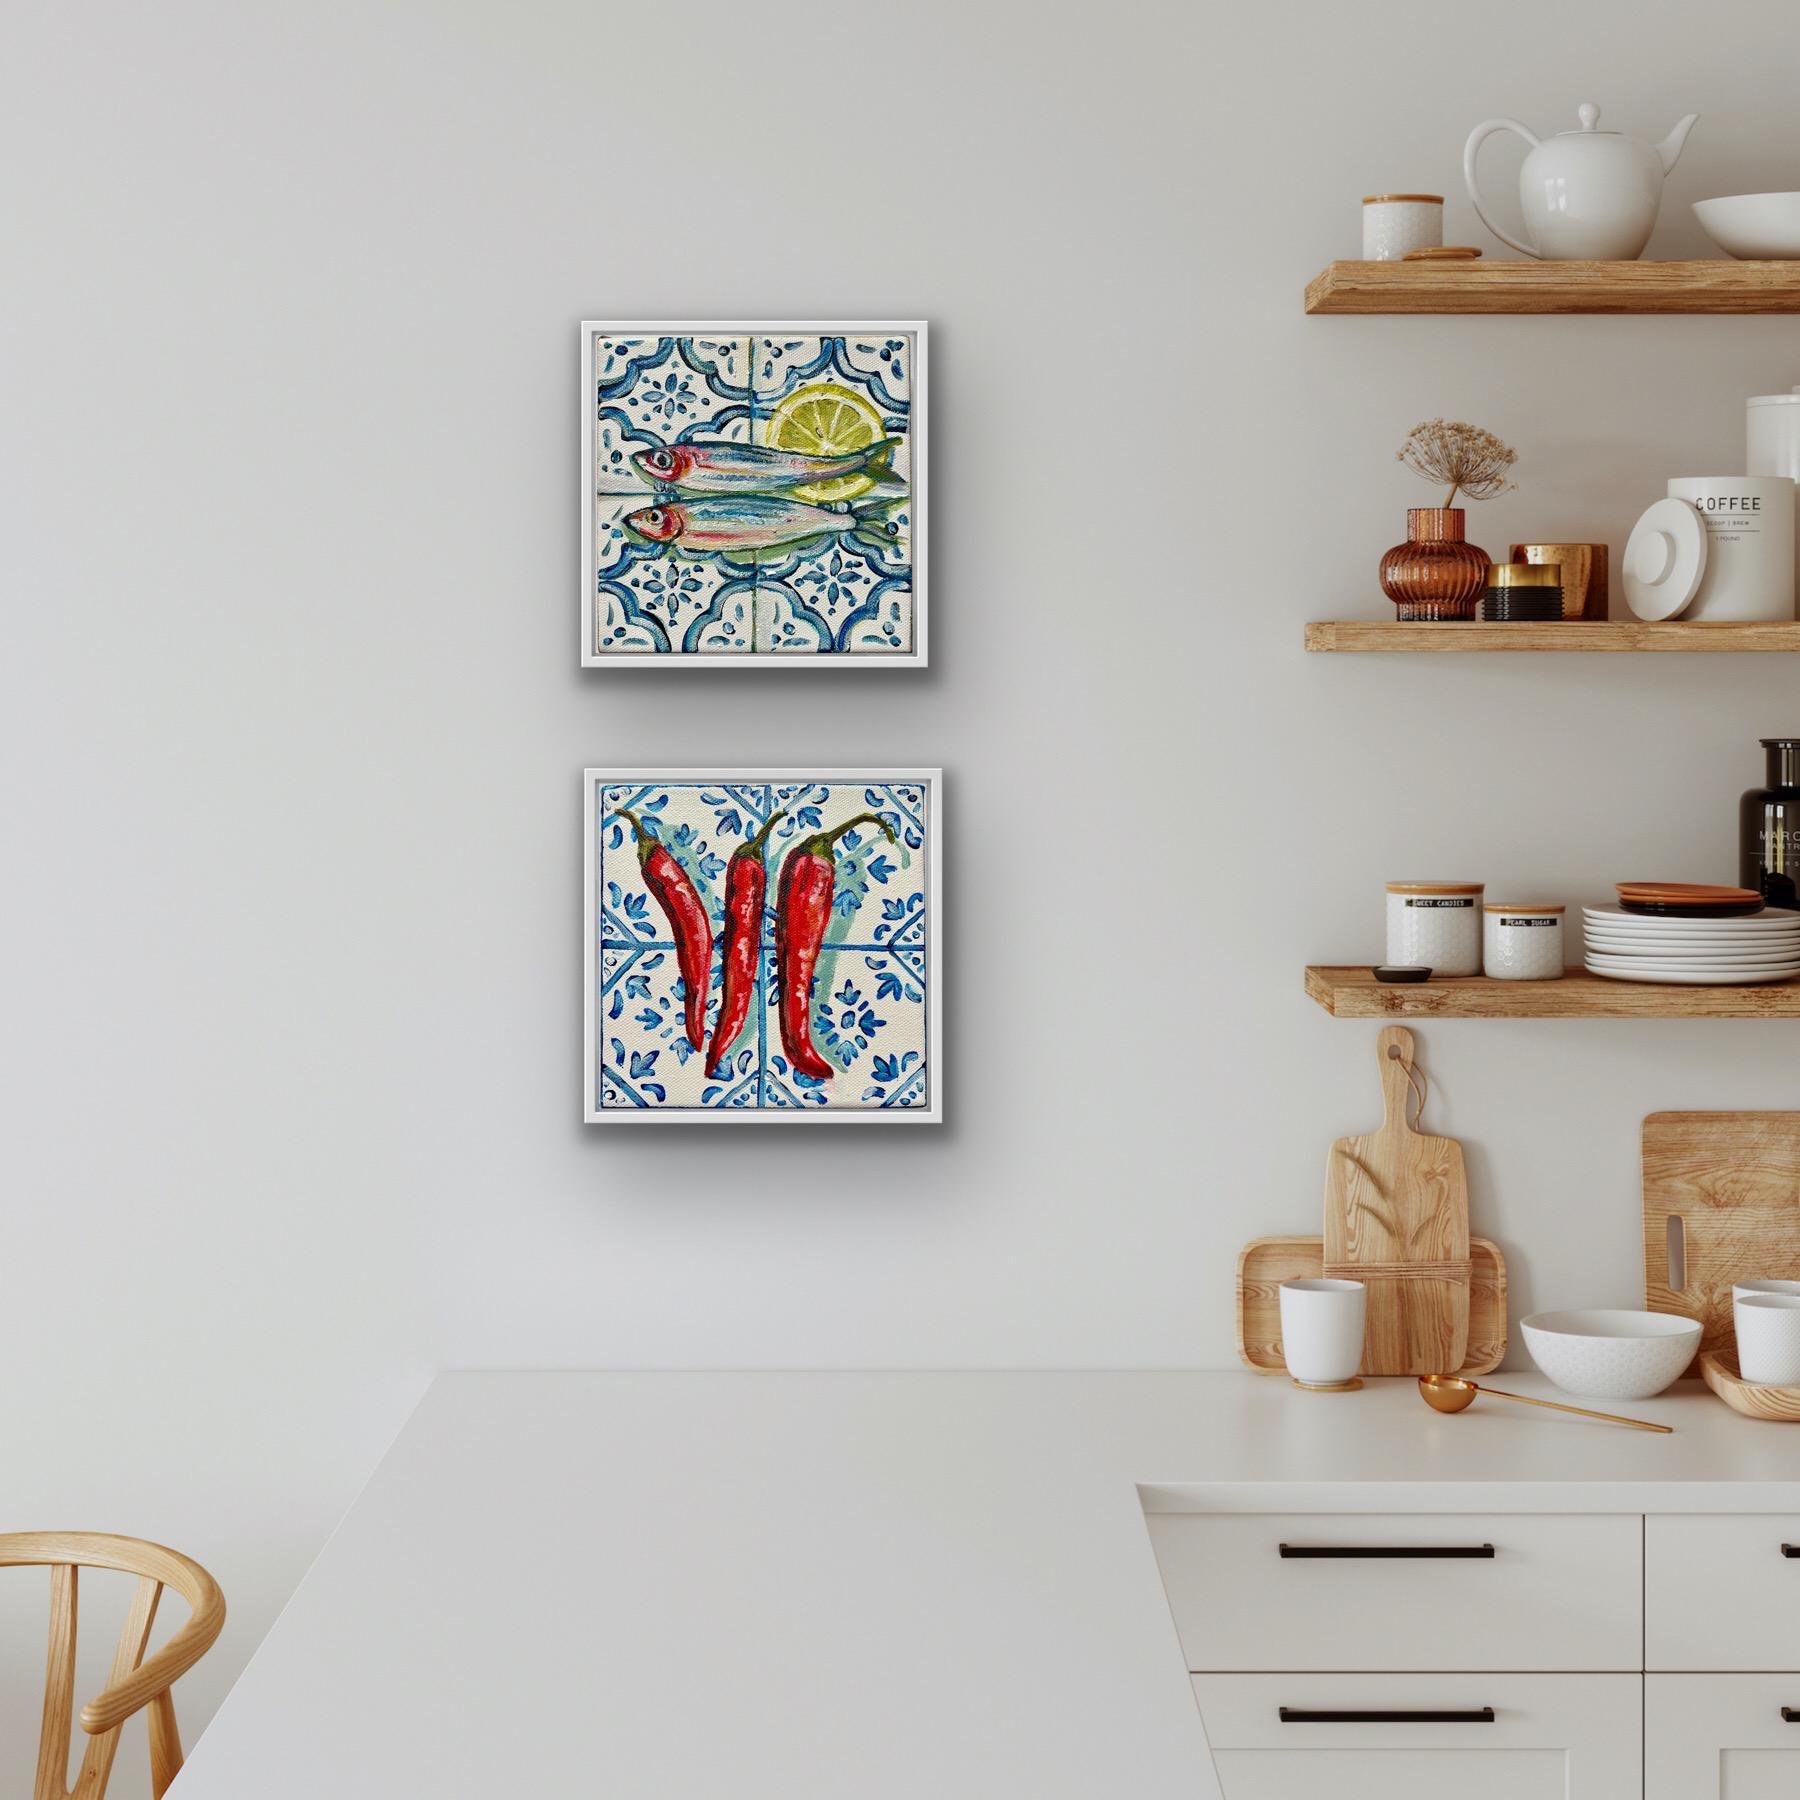 This contemporary still-life depicts a two juicy sardines with a slice of lemon on blue and white Mediterranean tiles. This box canvas is part of my MINI Tiles series, and is ready to be hung unframed. Inspired by my Abuela's home kitchen.

This